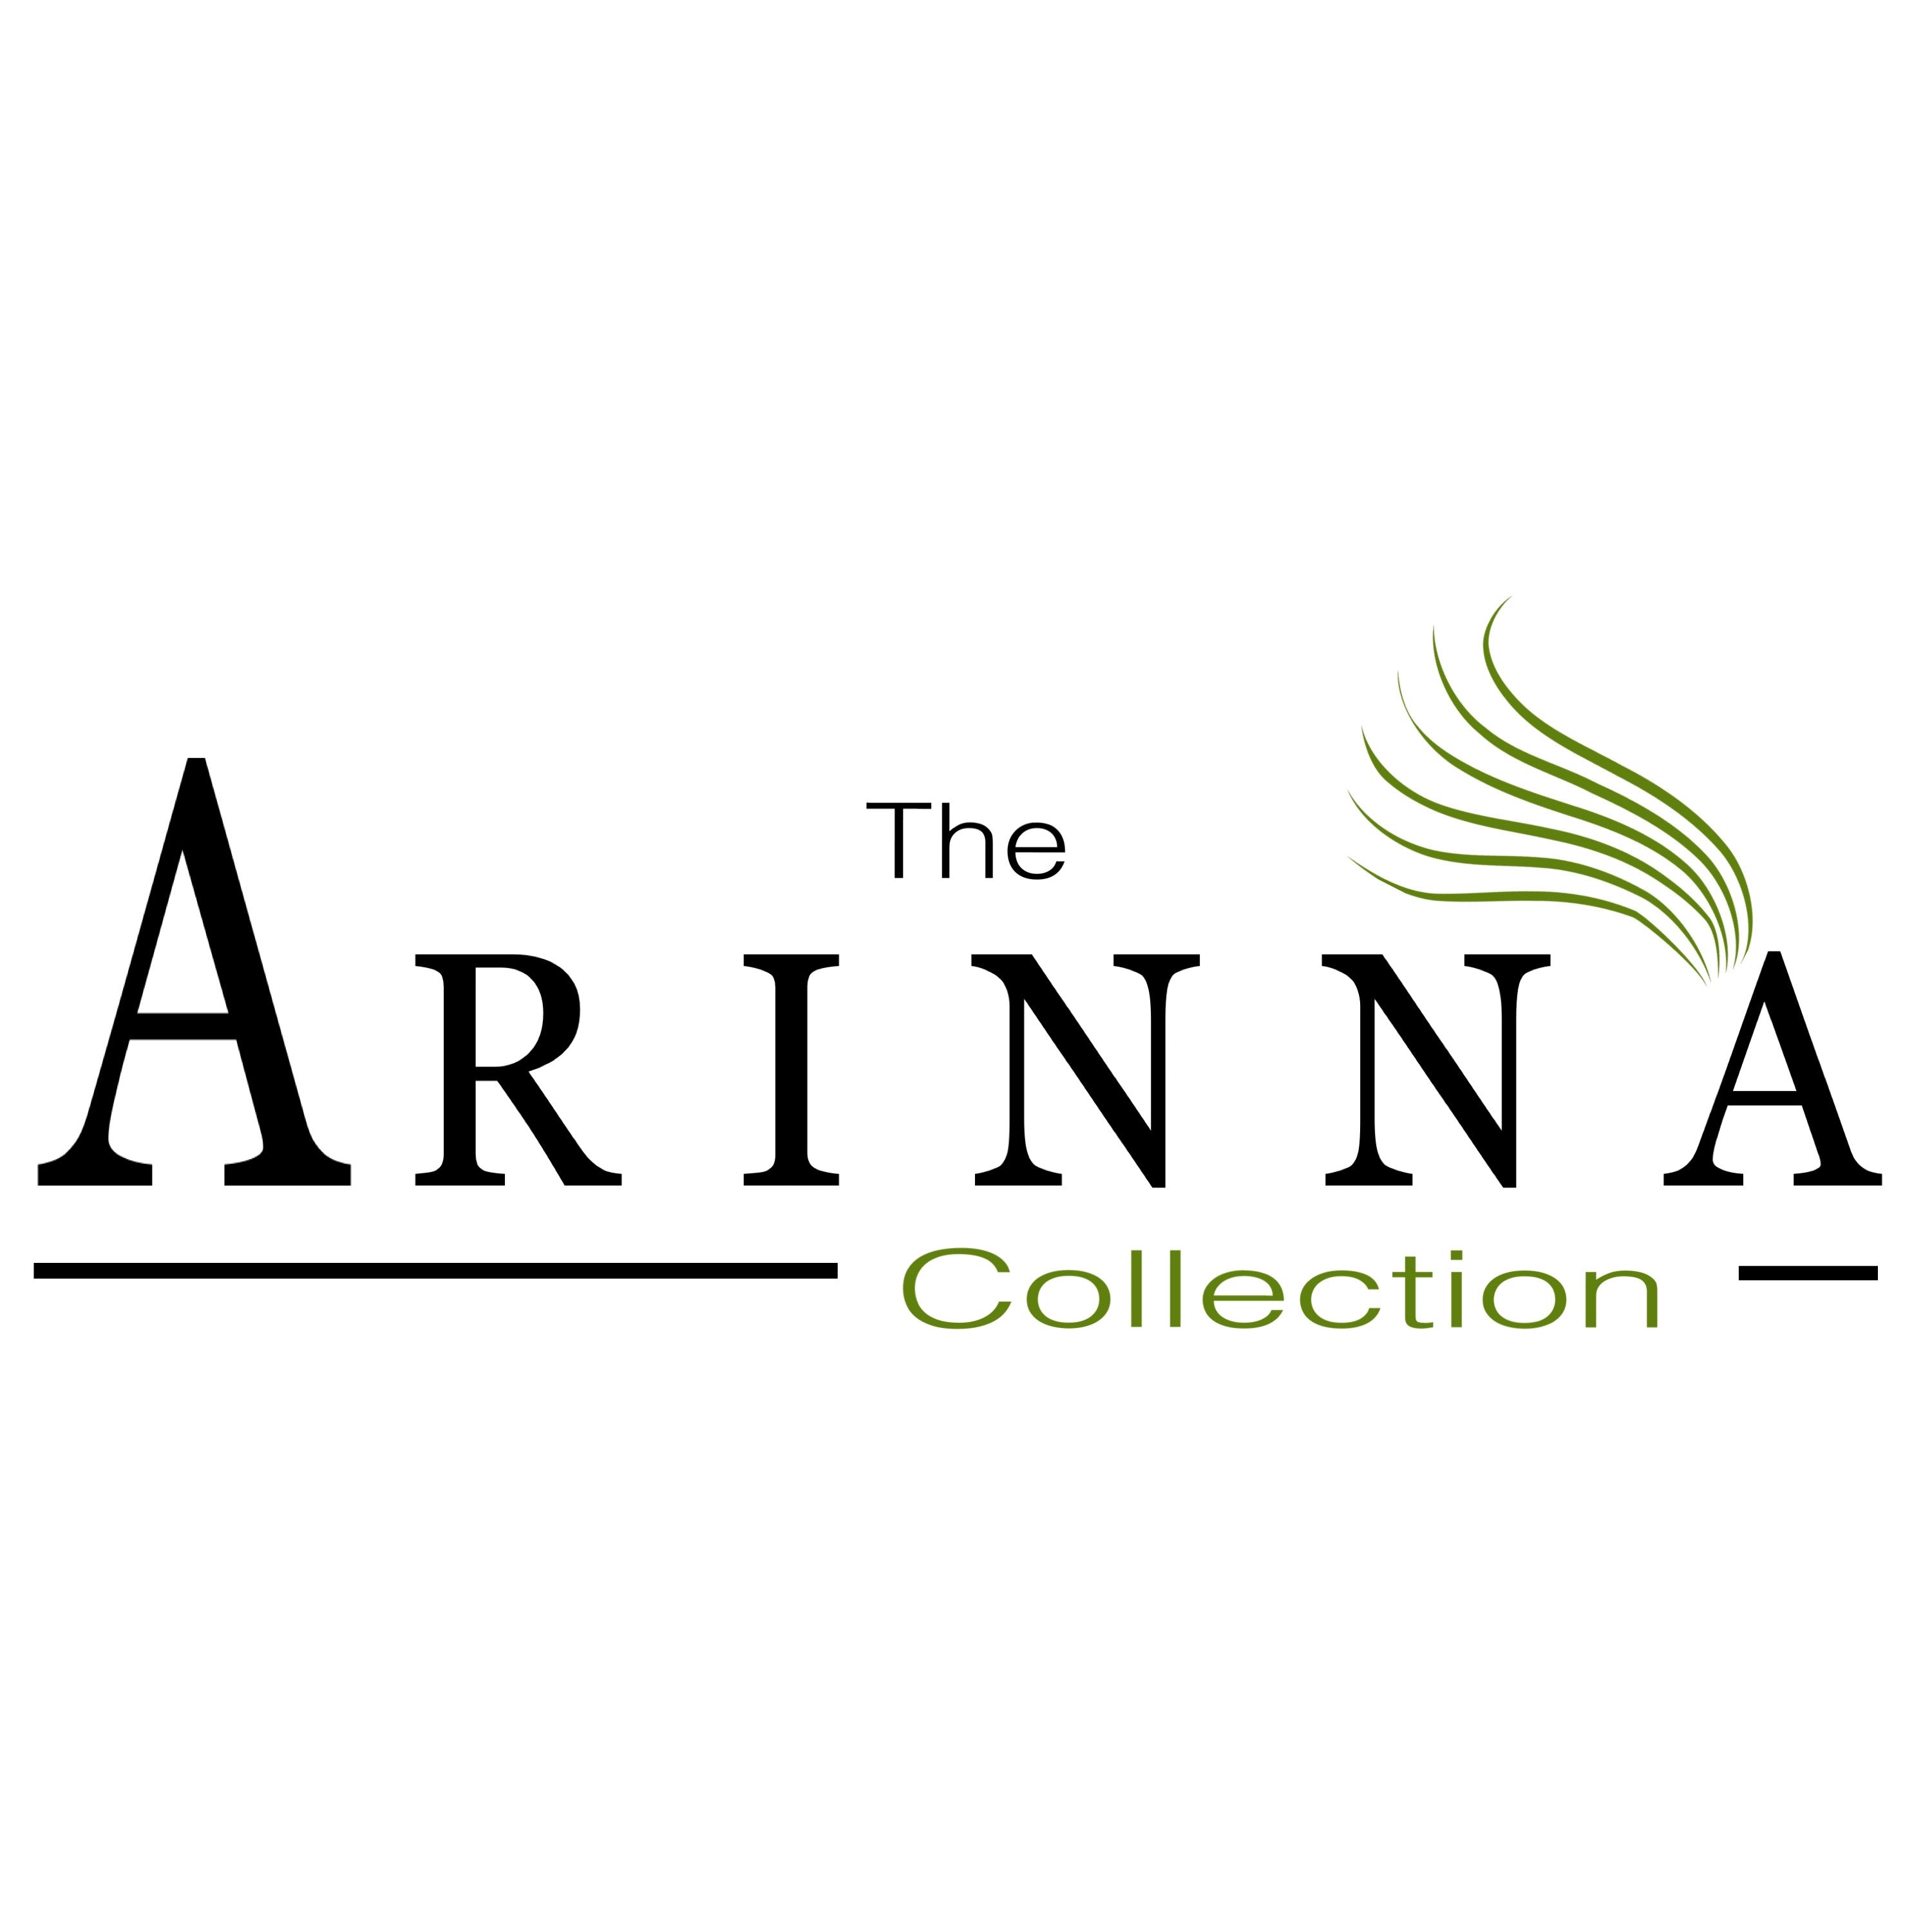 The Arinna Collection